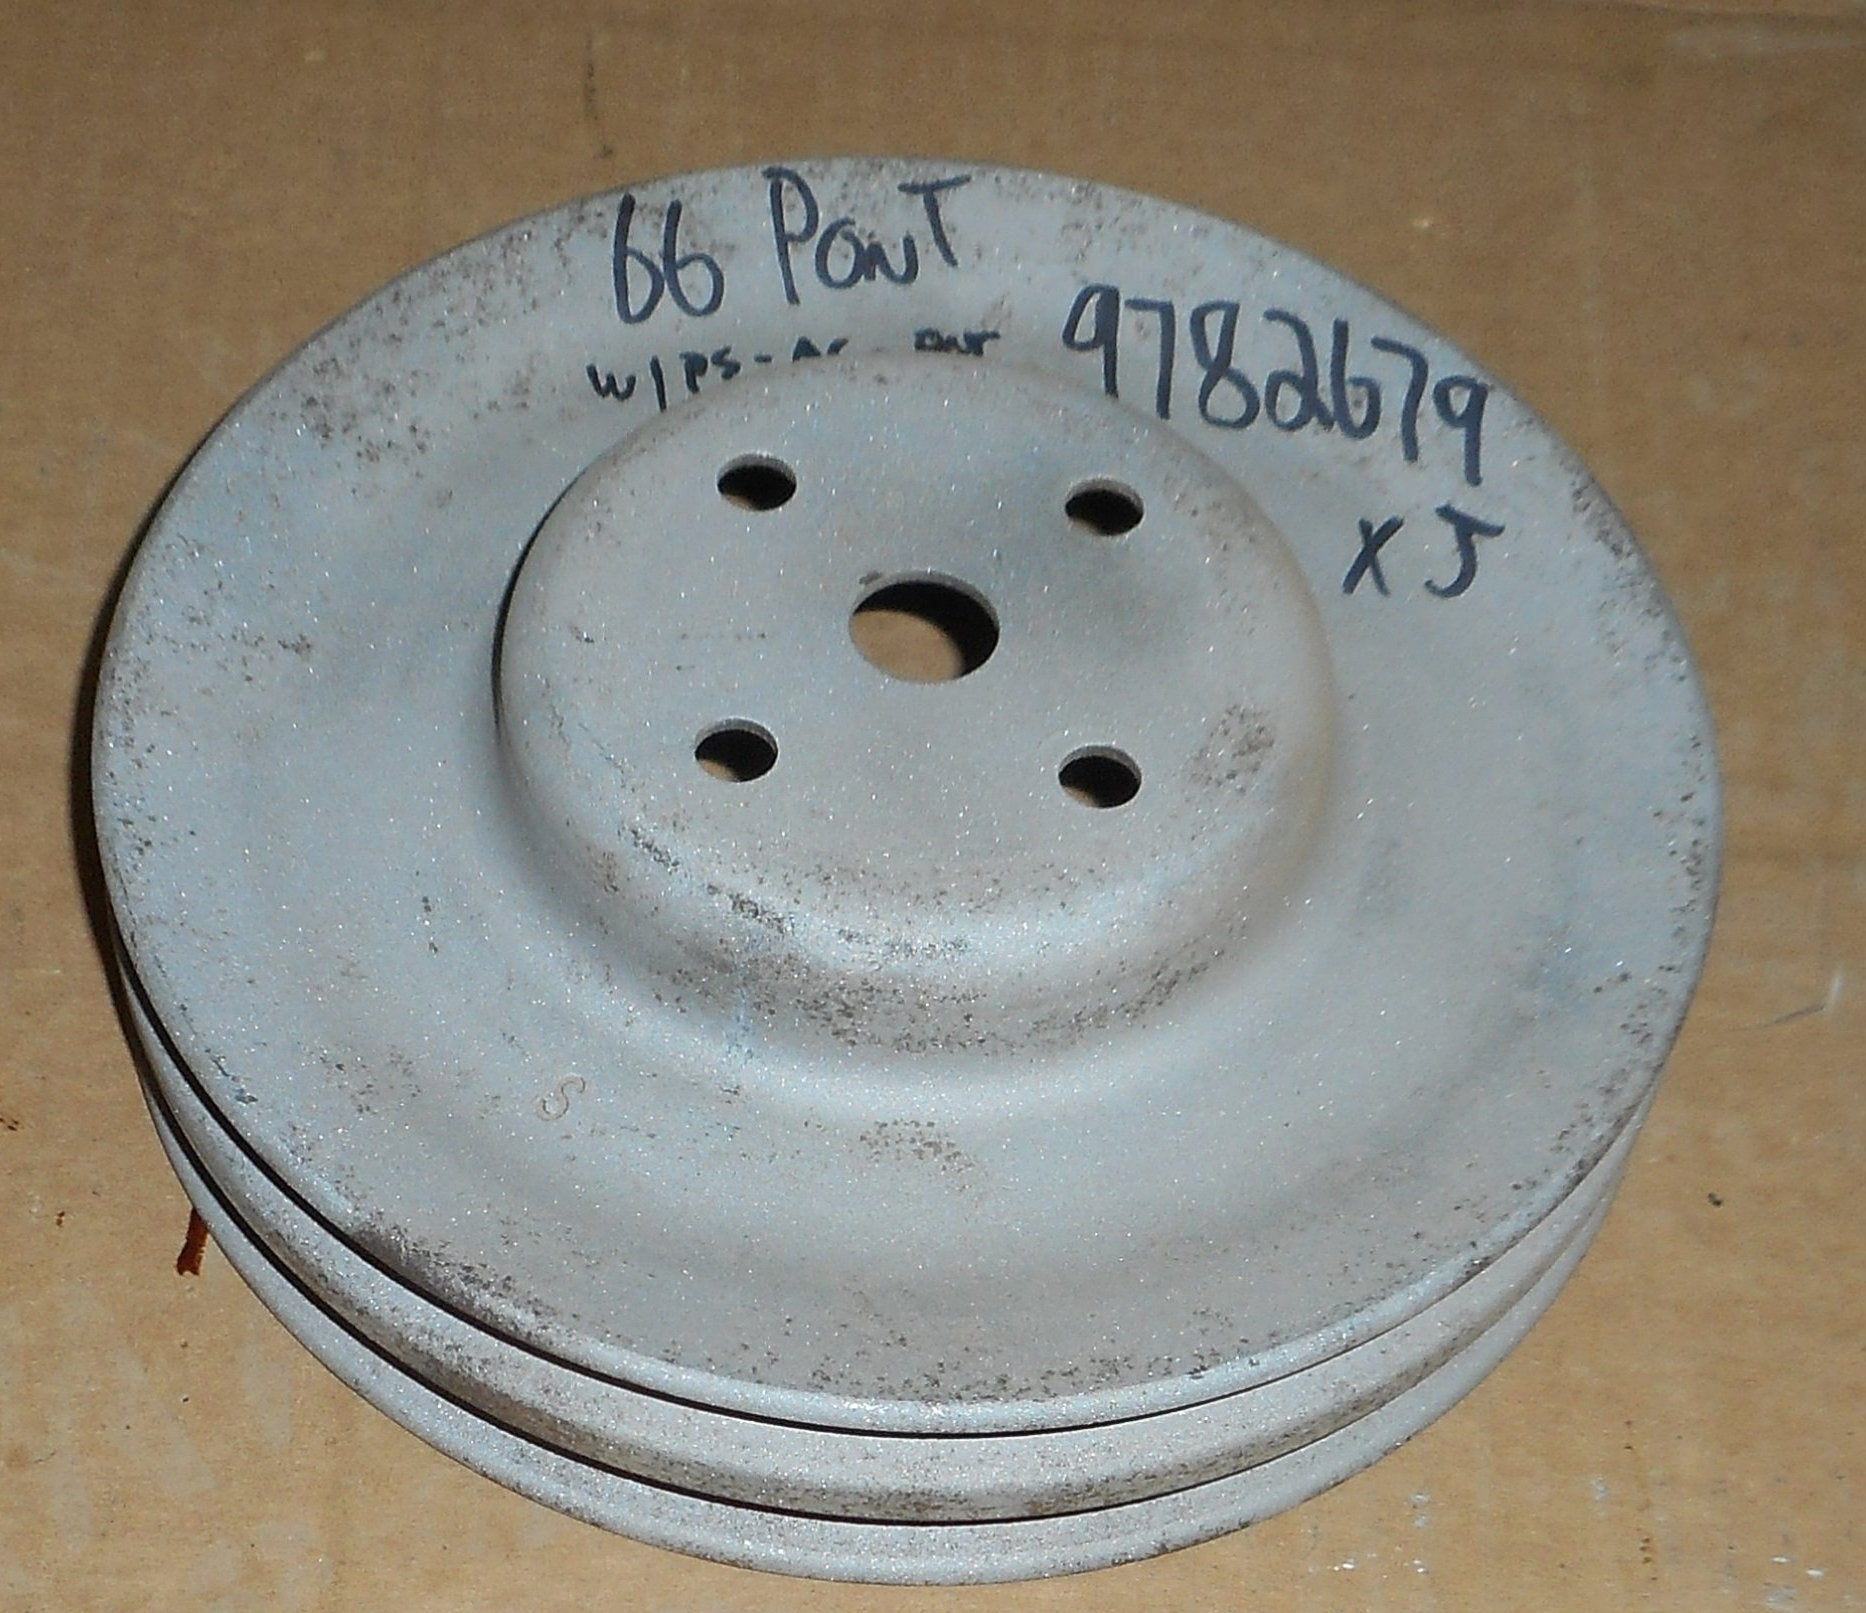 FAN PULLEY, 2 GROOVE, AC & PS SMOG, USED, 66 PONTIAC V8